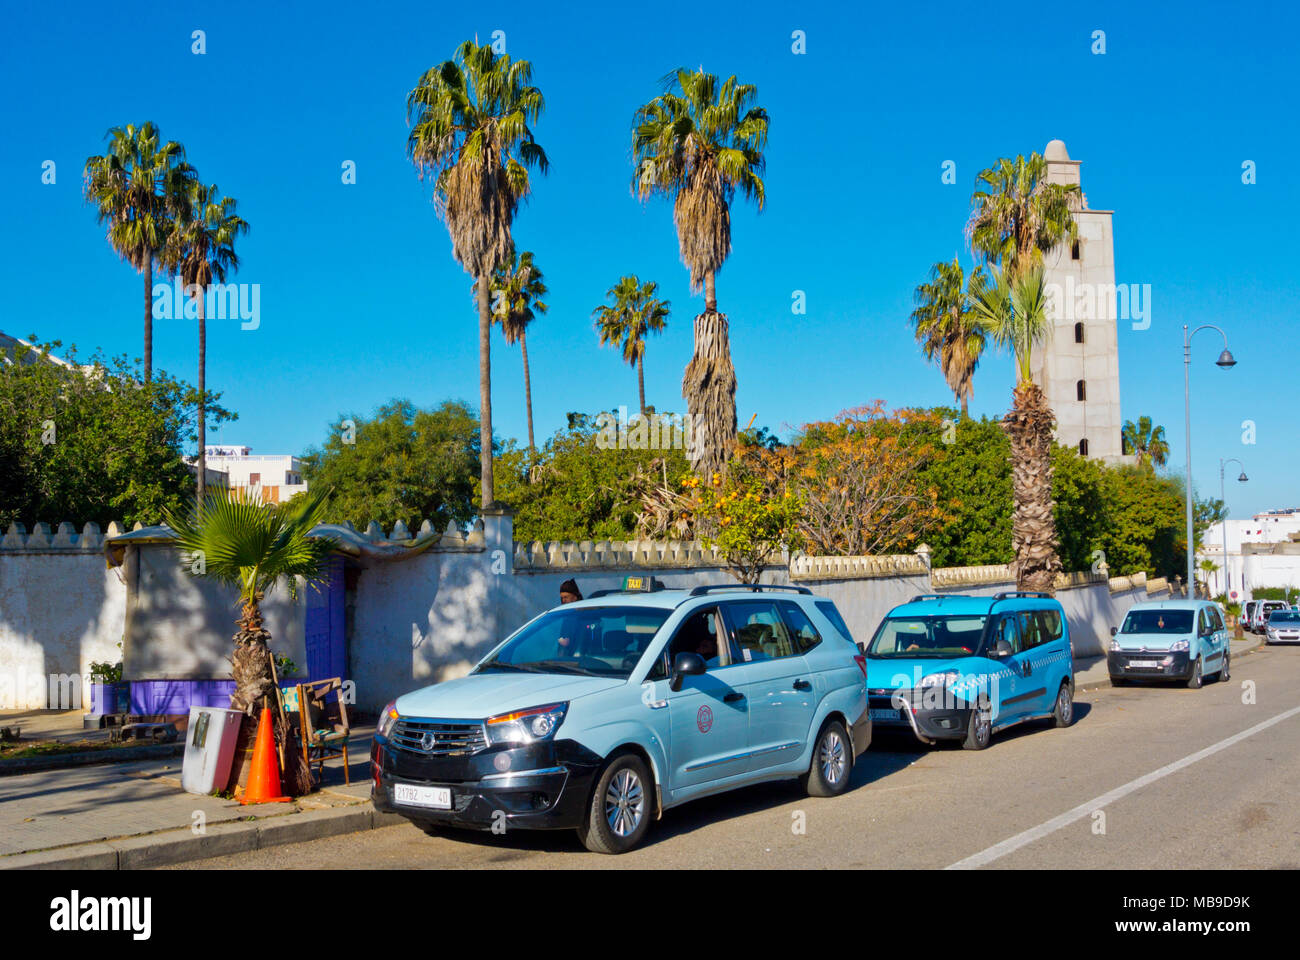 Grand Taxi, Assilah, Marocco settentrionale, Africa Foto Stock